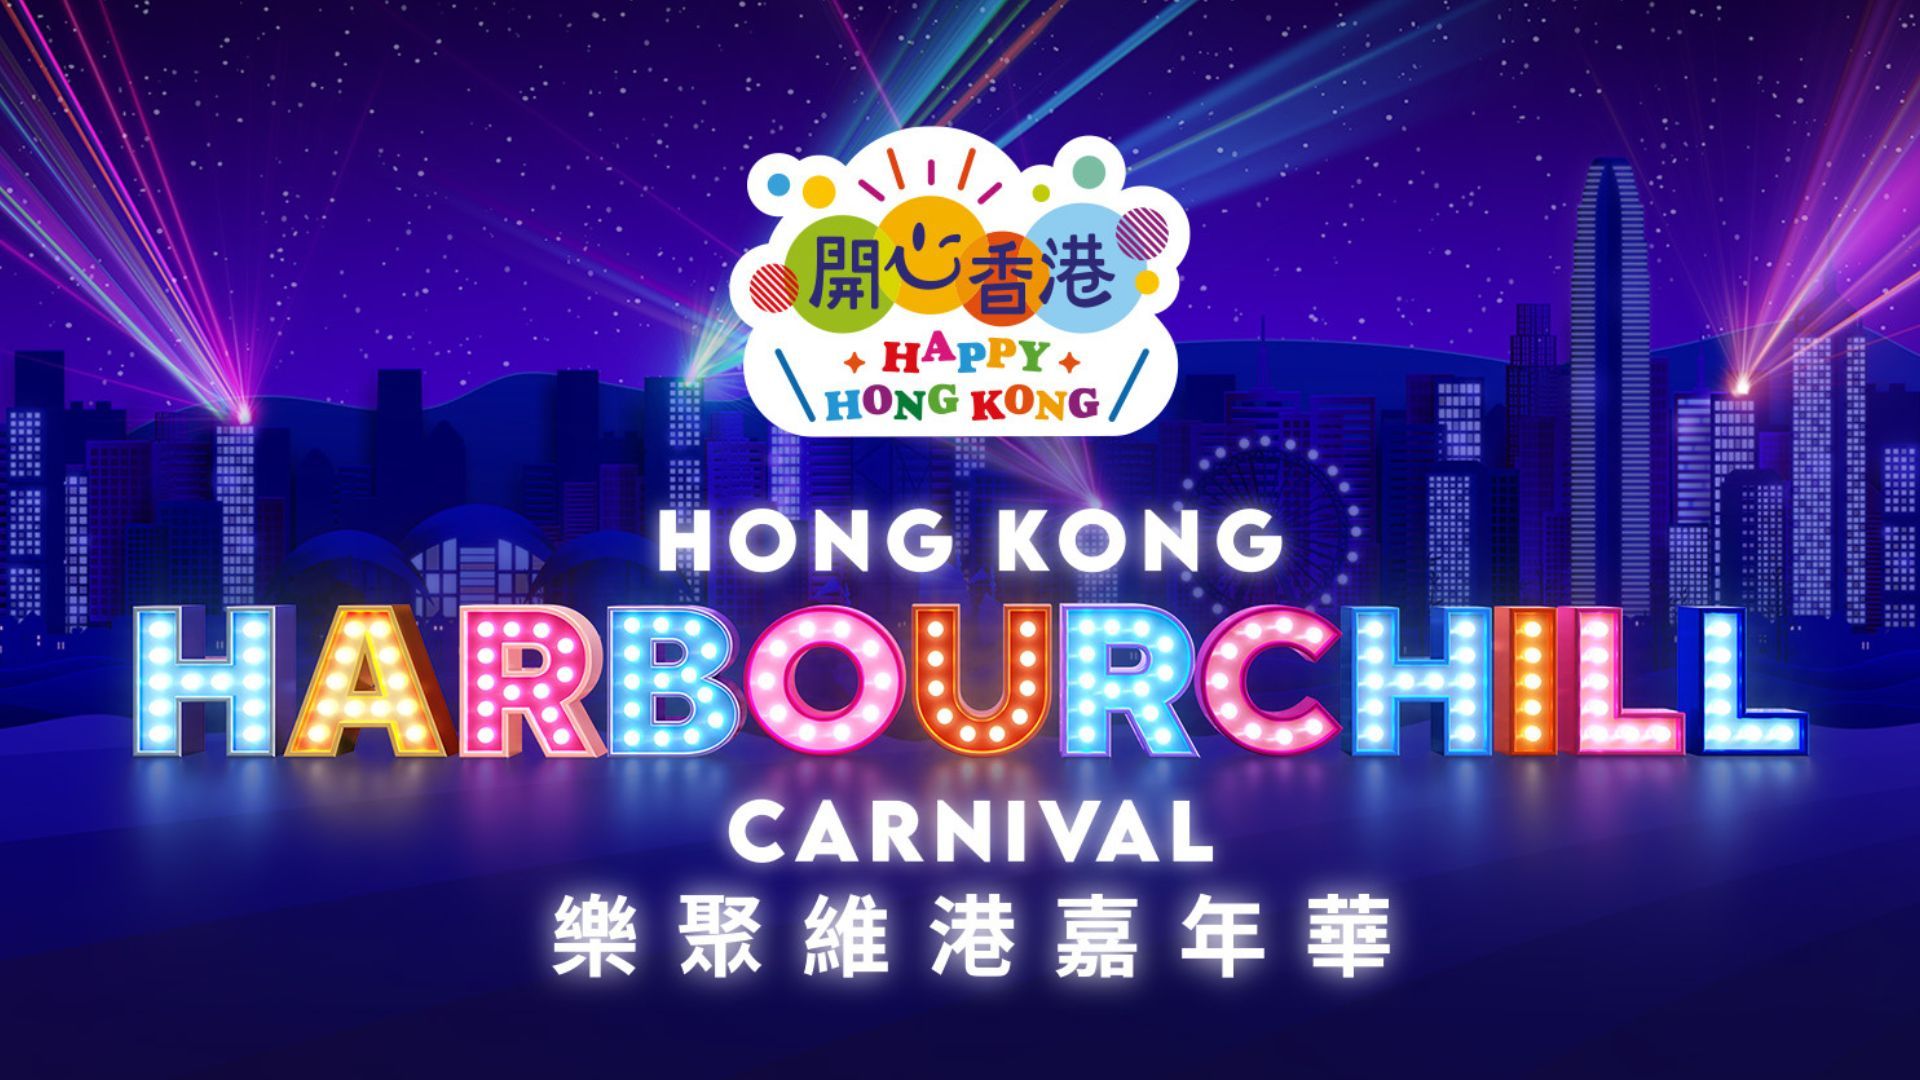 A largescale Hong Kong music carnival is happening in July